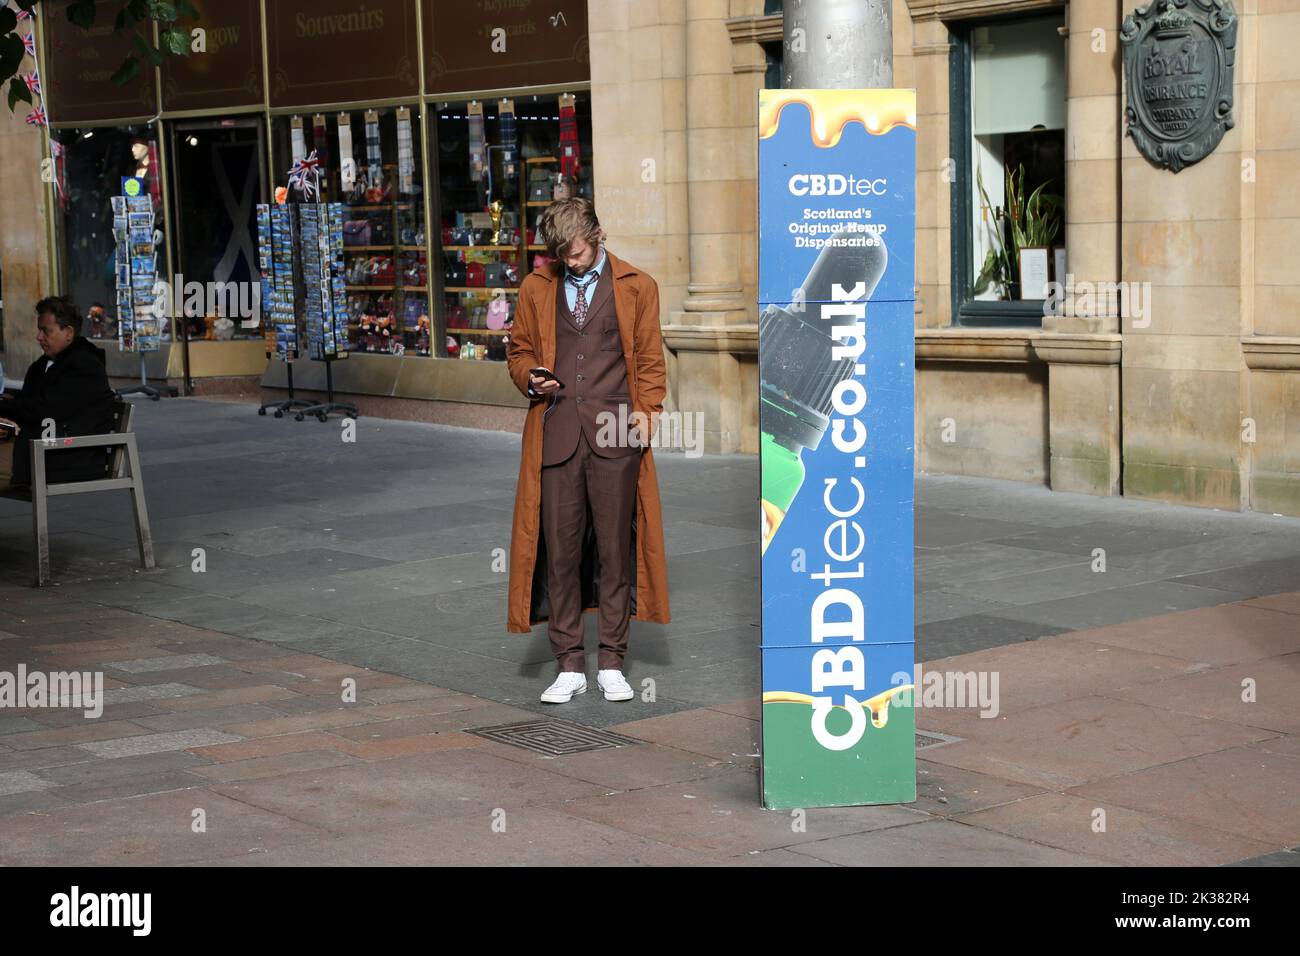 Buchanan St, Glasgow, Scotland, UK. Police Box painted in original blue. Now converted to a small retail unit selling CBD Oils Concentrates Edibles. CBDtec Scotland's Original Dispensaries. Cannabis Trades Association.Man standing near by looks like the Scottish Actor David Tennant dressed as Dr Who Stock Photo